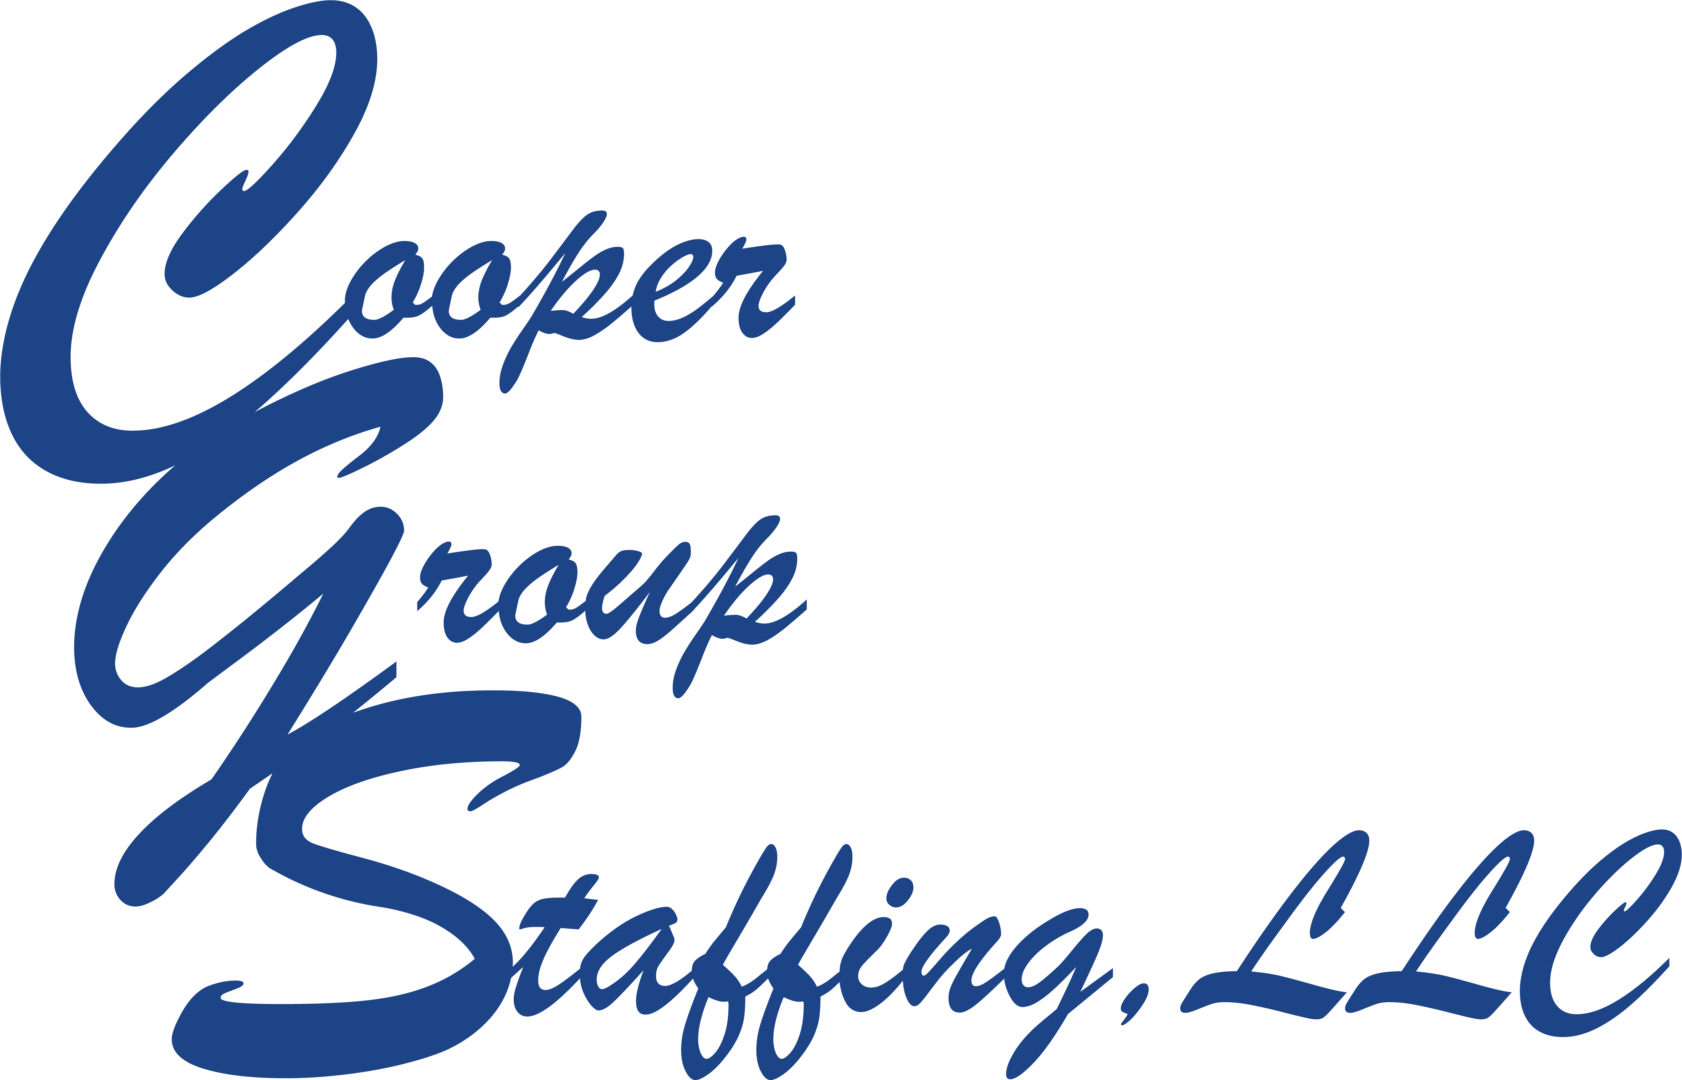 CX-78803_Cooper Group Staffing_FINAL